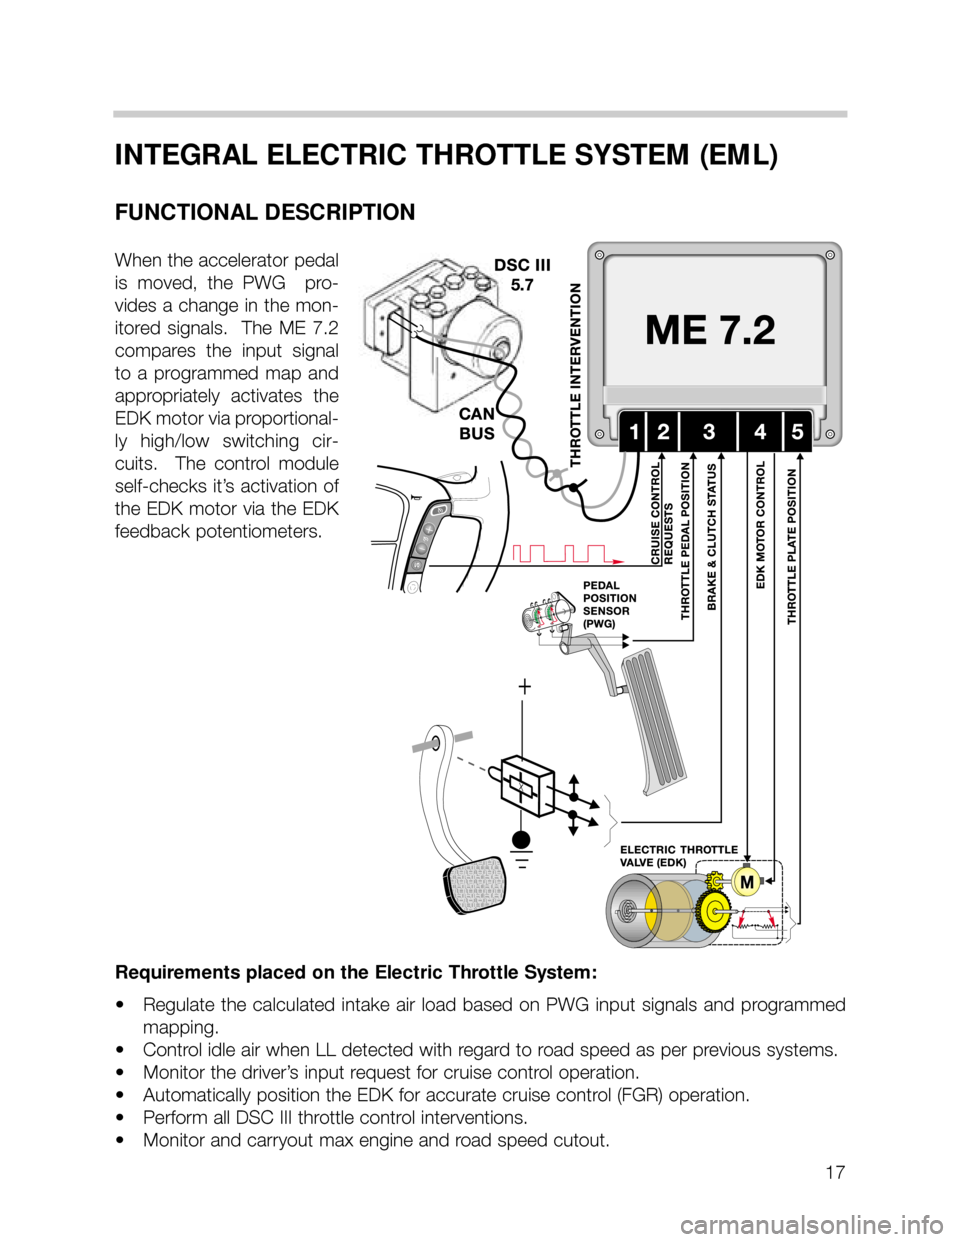 BMW X5 2001 E53 M62TU Engine User Guide 17
INTEGRAL ELECTRIC THROTTLE SYSTEM (EML)
FUNCTIONAL DESCRIPTION
When the accelerator pedal
is  moved,  the  PWG    pro-
vides a change in the mon-
itored  signals.    The  ME  7.2
compares  the  inp